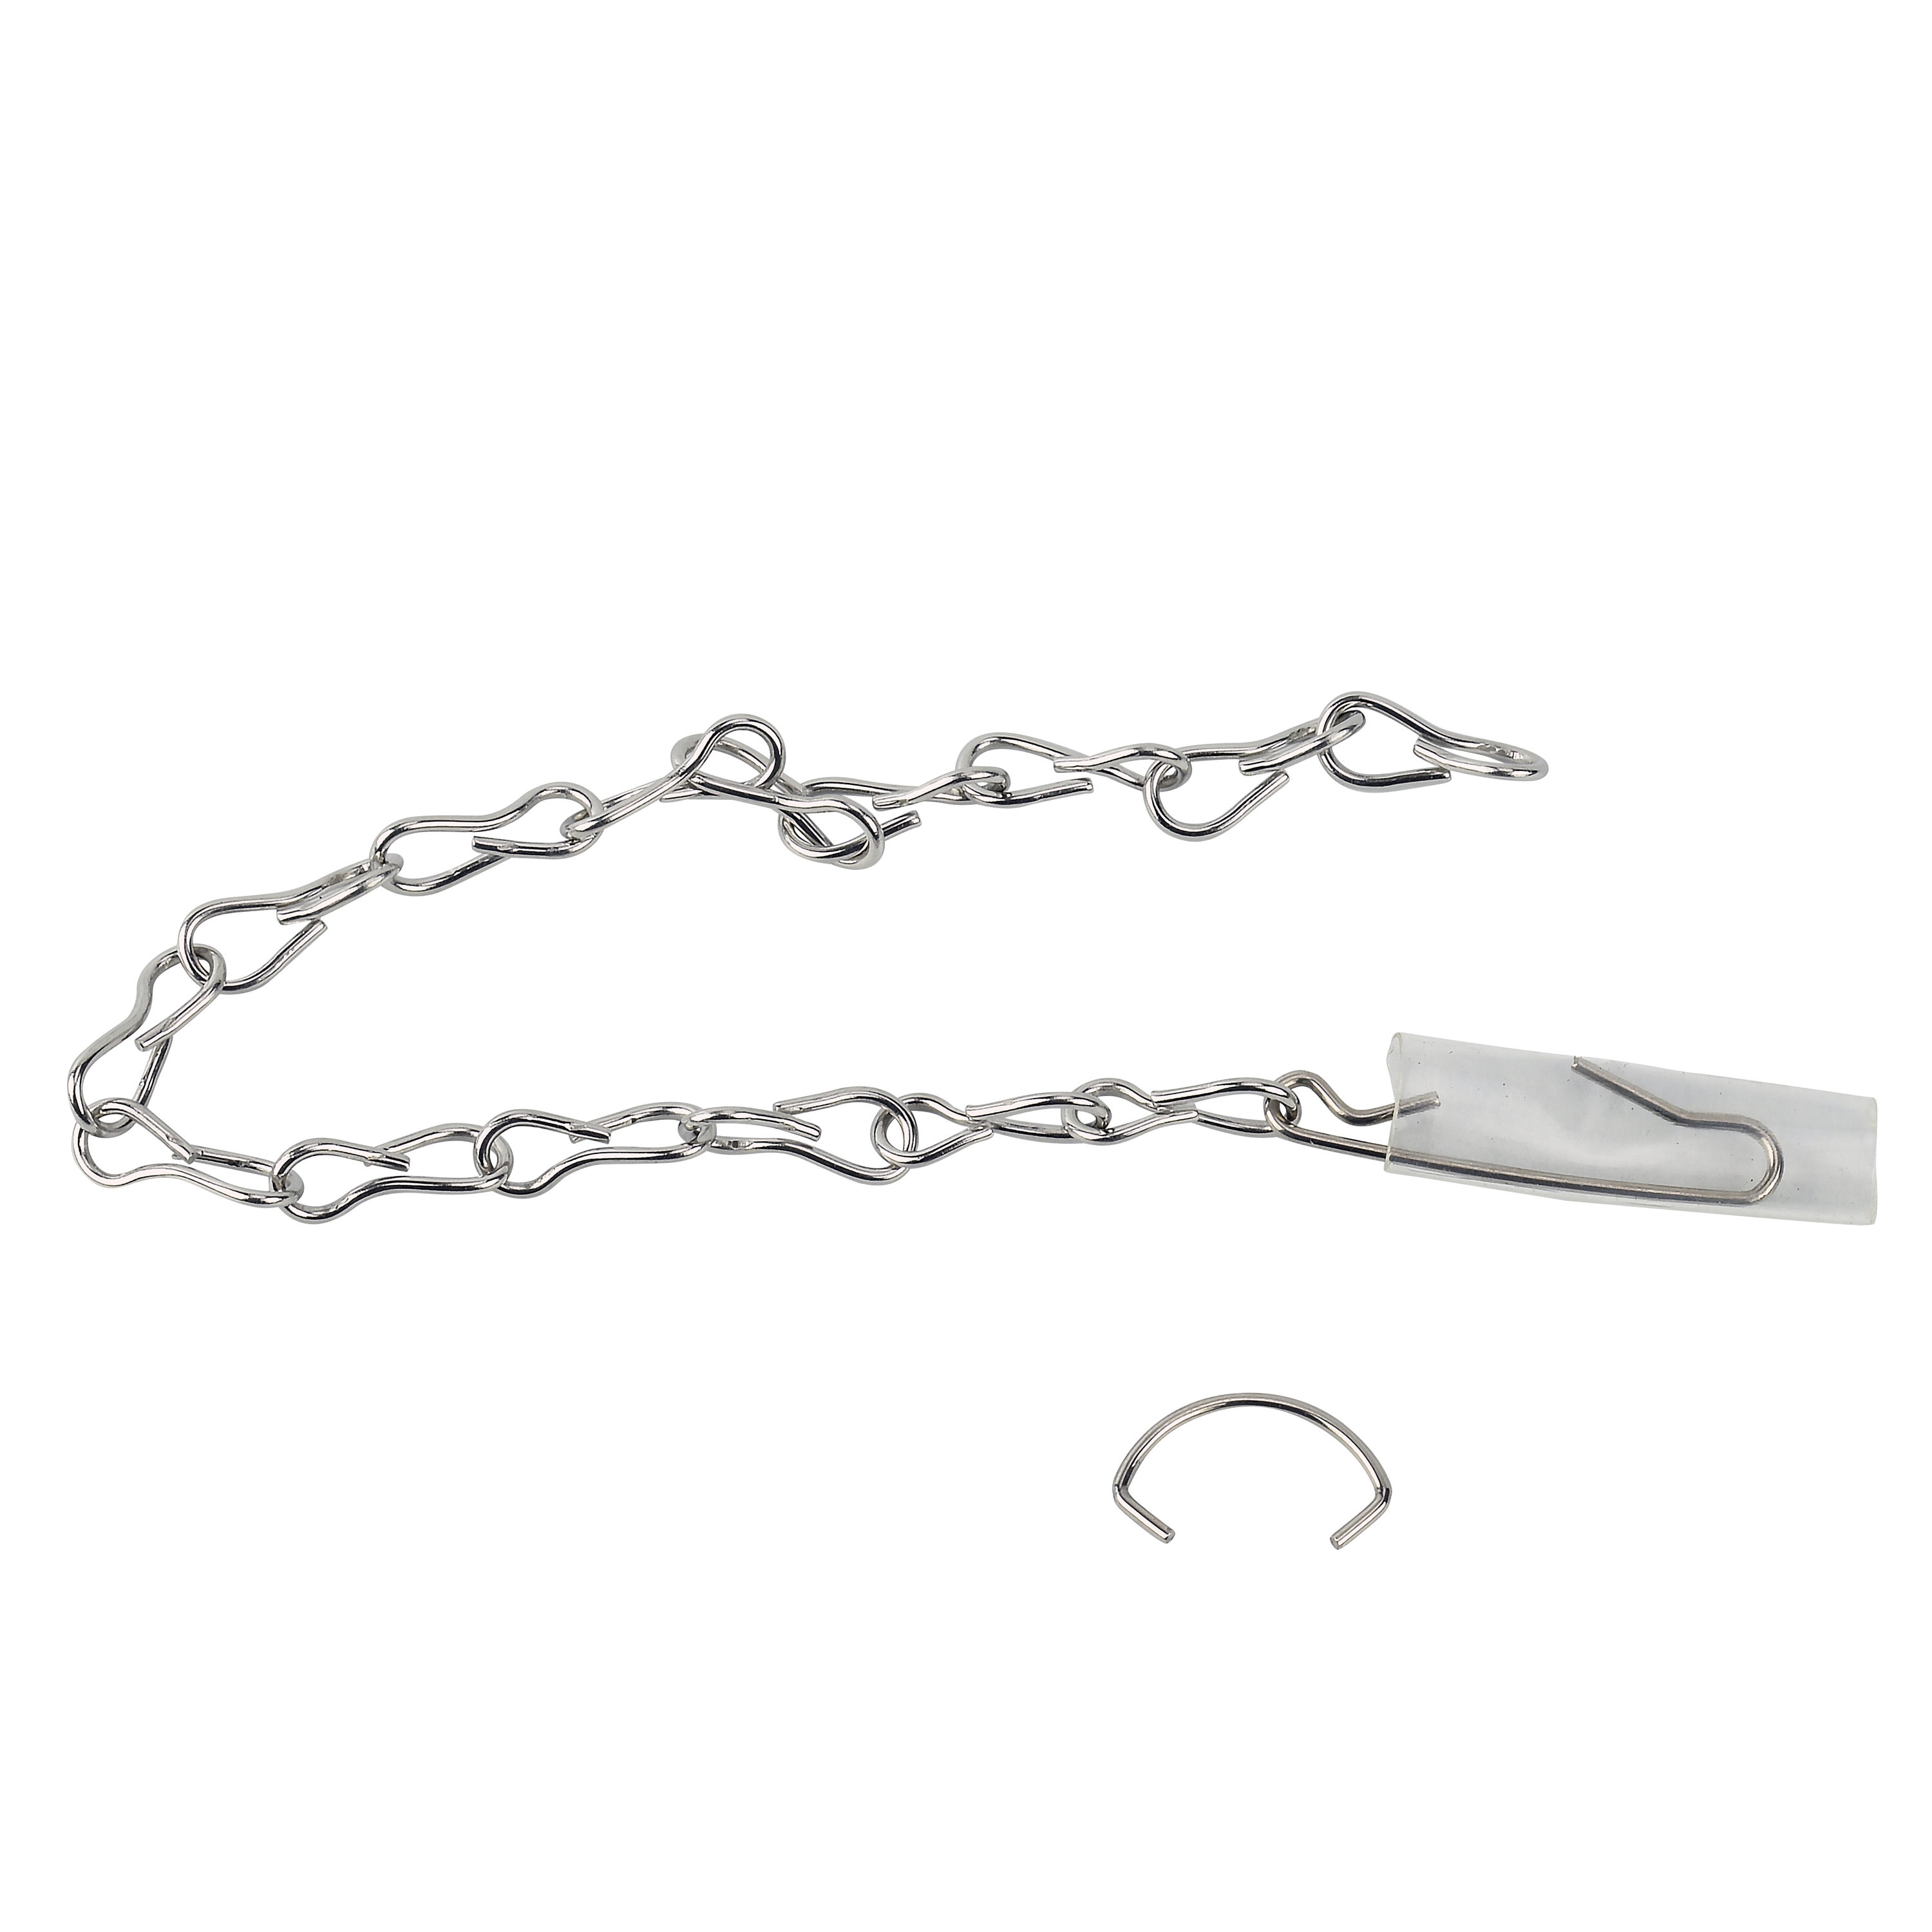 LDR 503 2492 Universal Stainless Steel Flapper Lift Chain